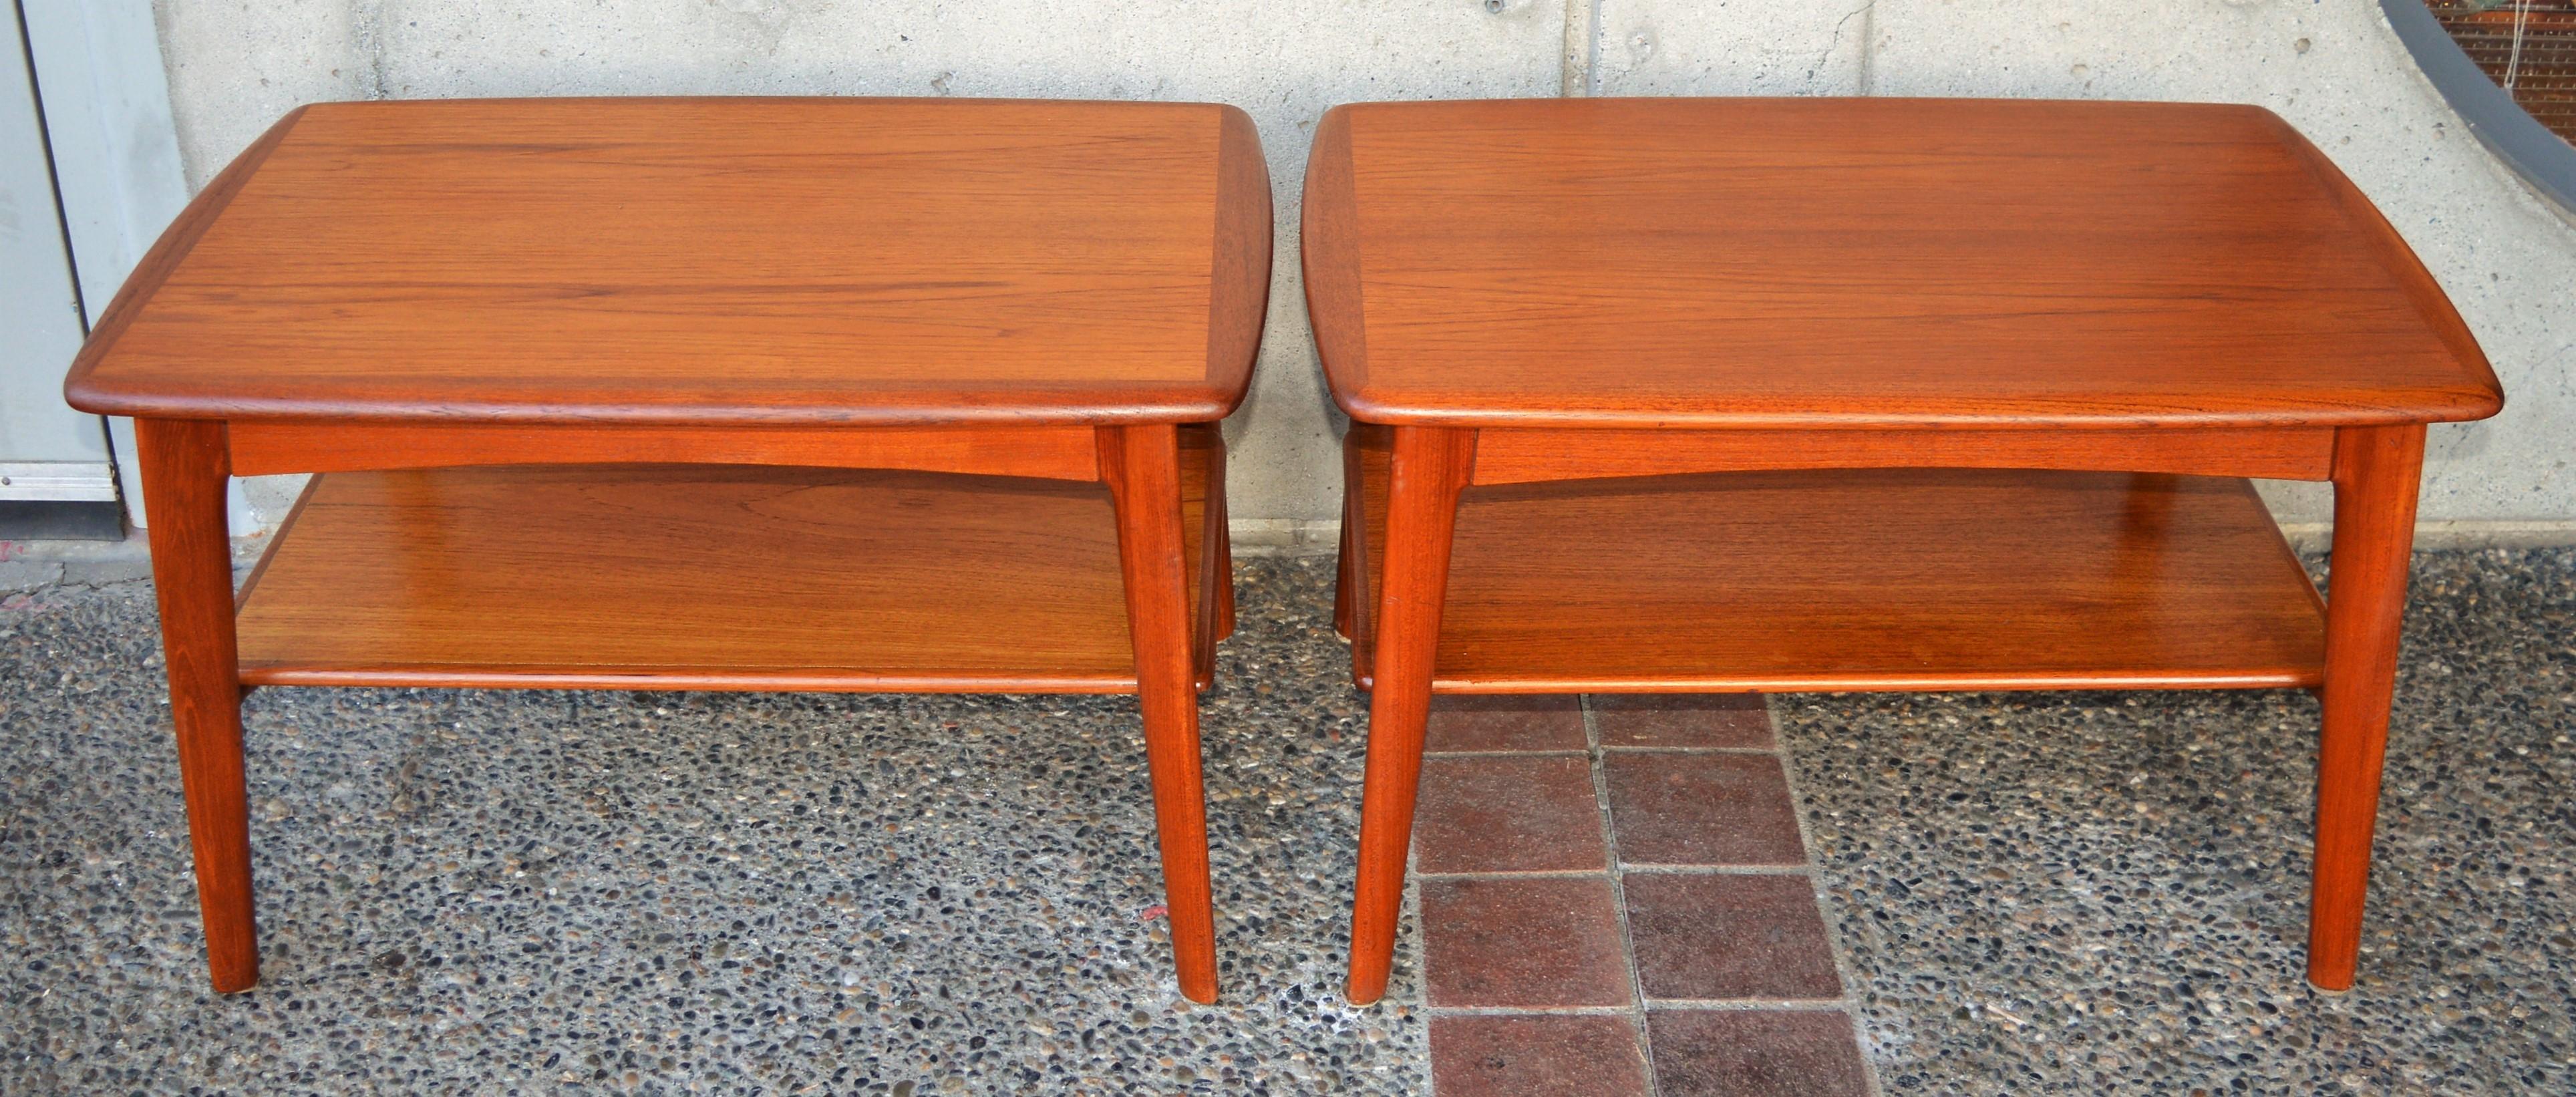 Pair of Quality Teak Side Tables or Nightstands by Svend Madsen W/Shelf & Drawer 3